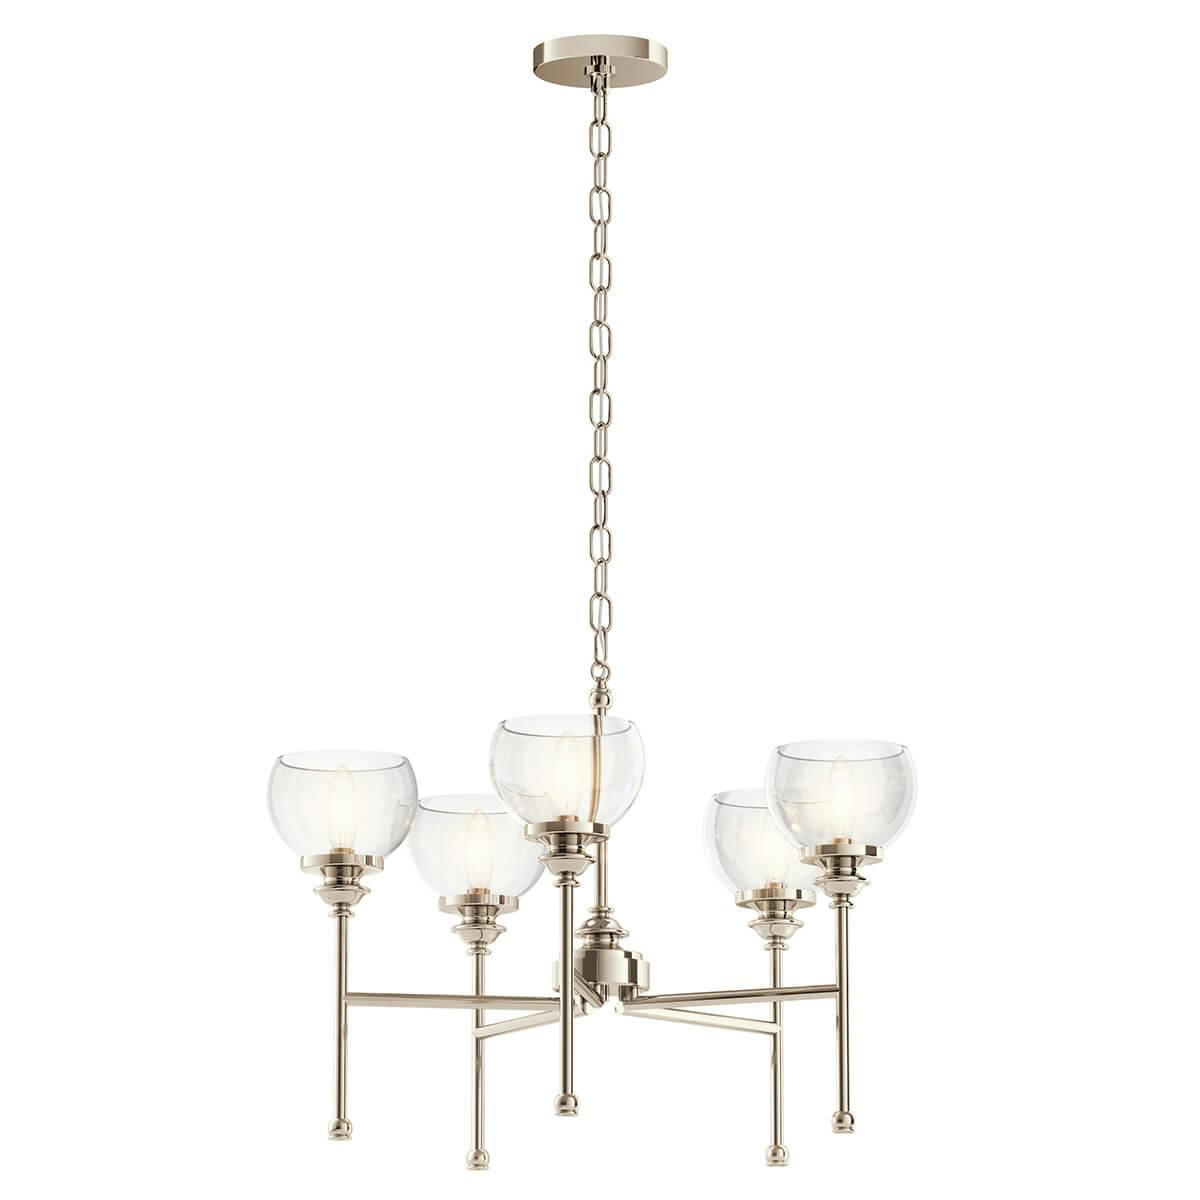 Lecelles 5 Light Chandlier Polished Nickel on a white background